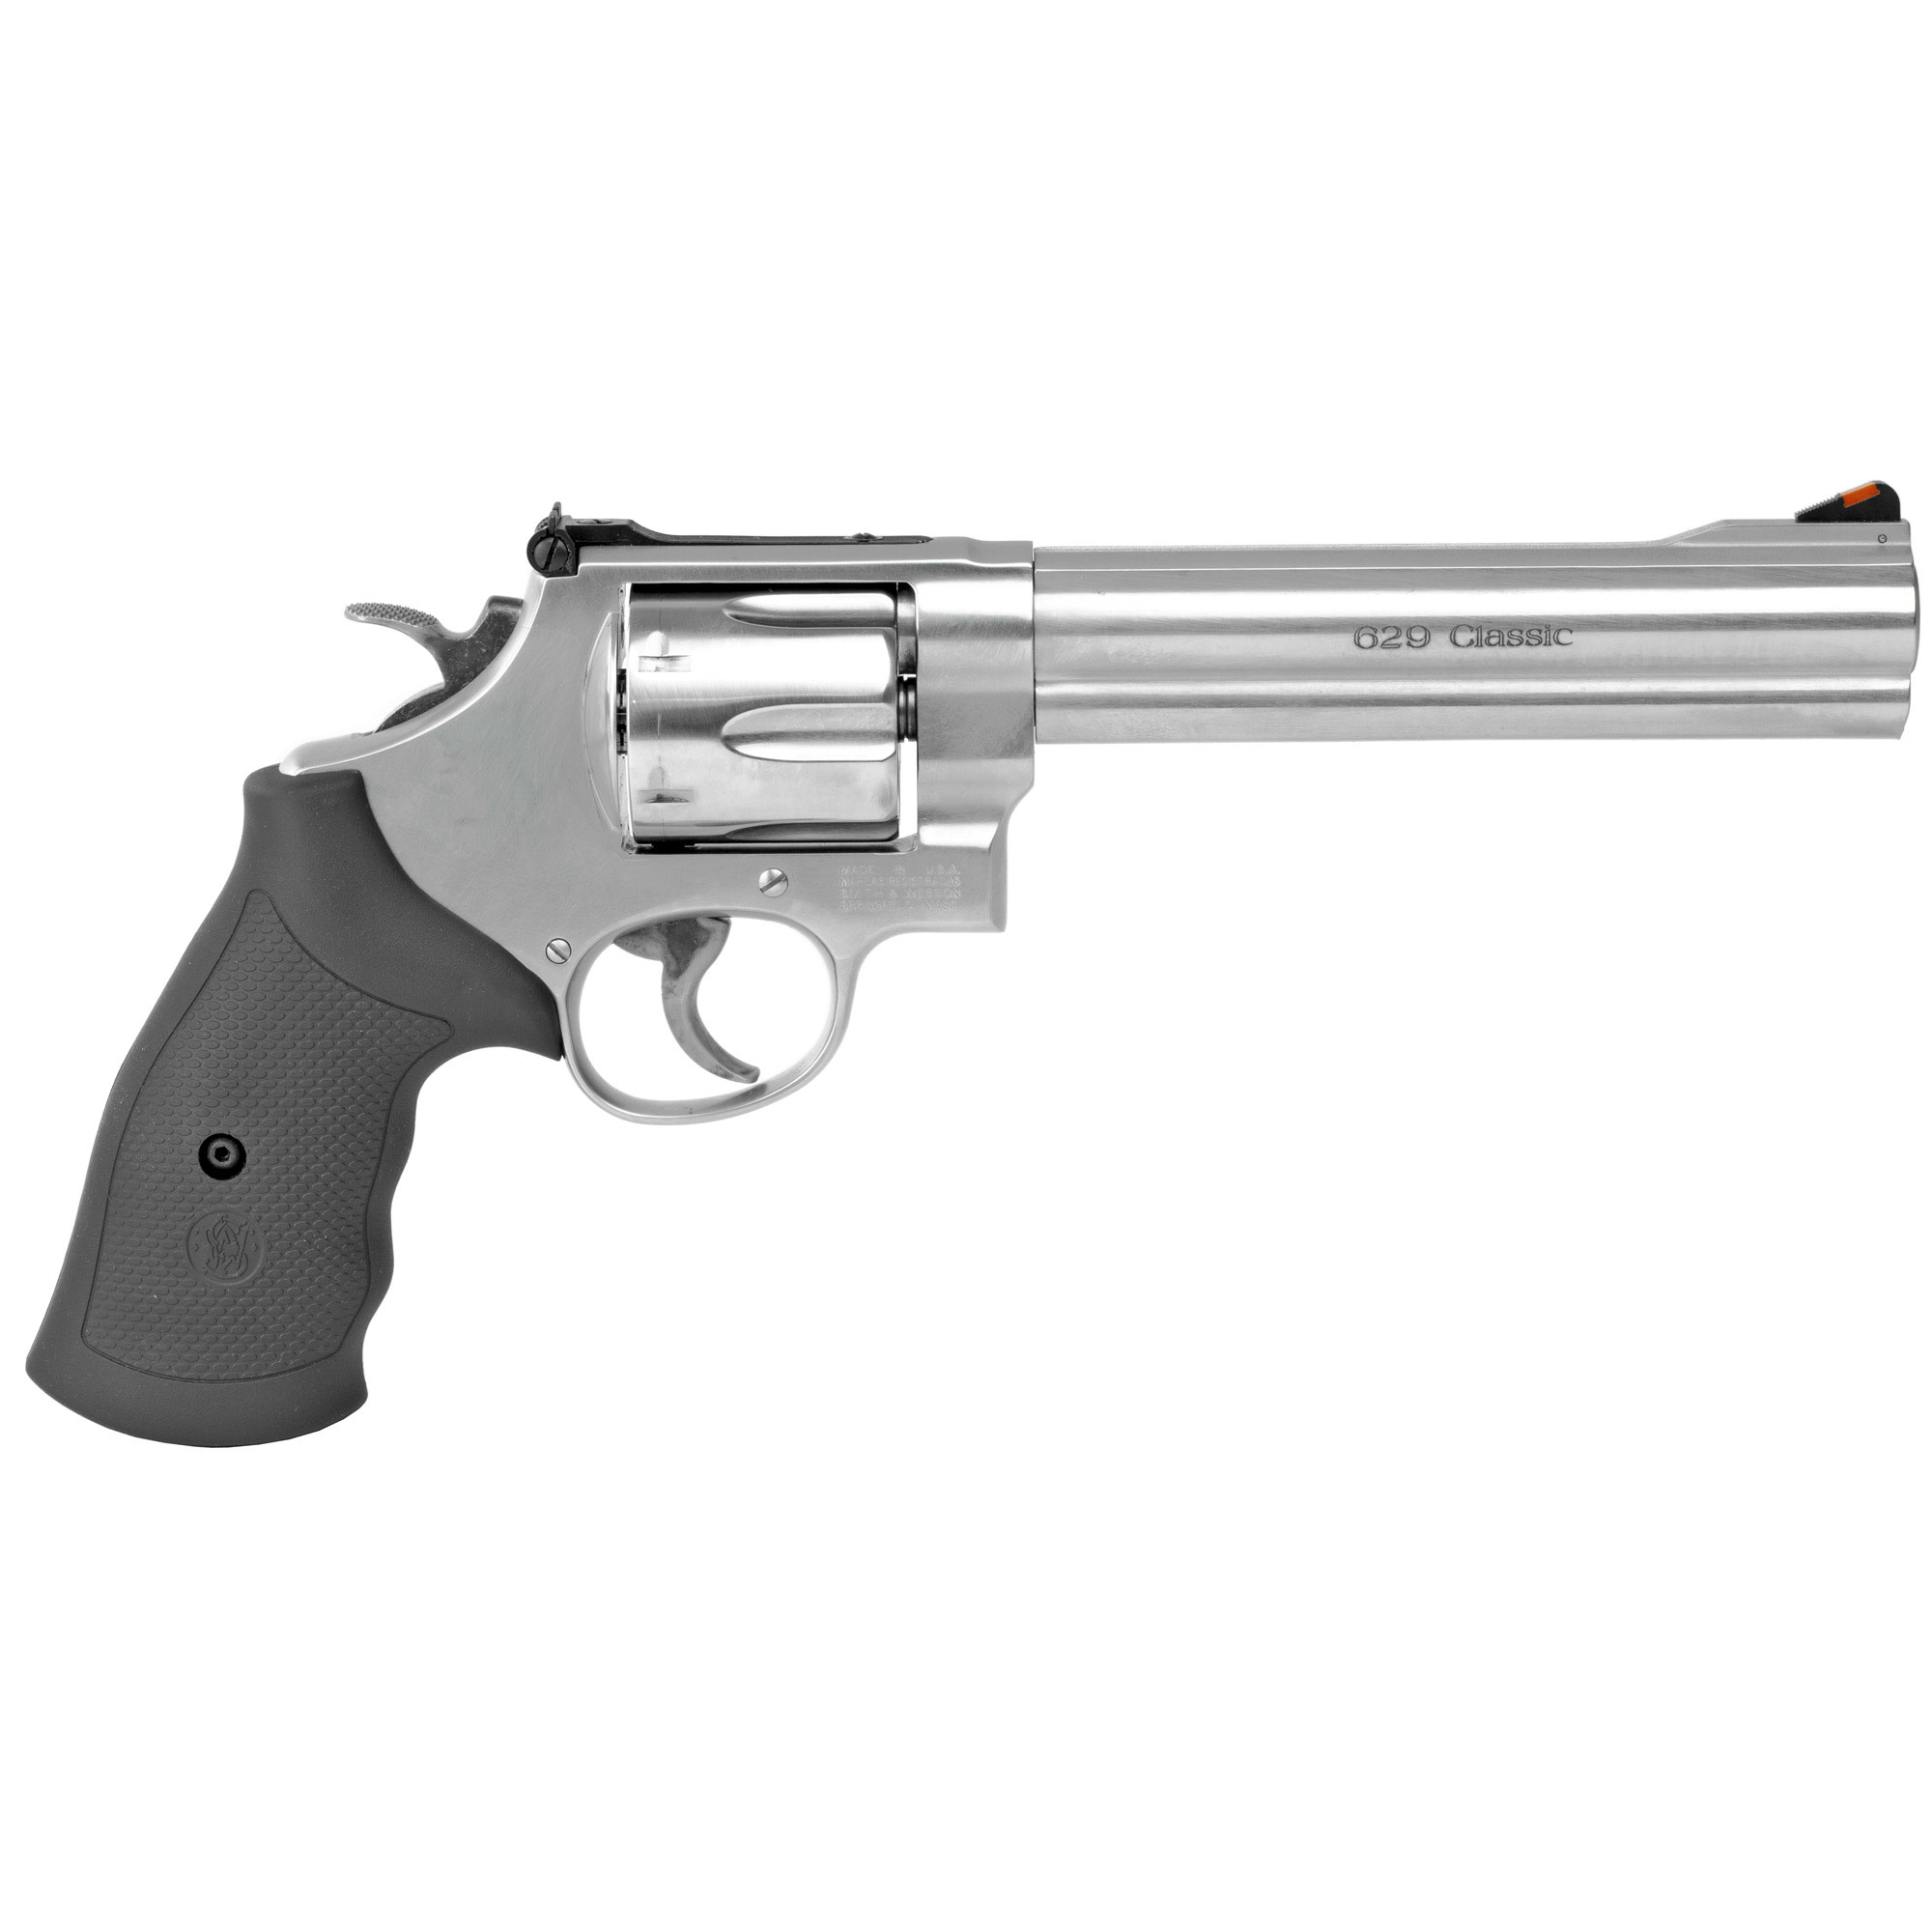 Smith & Wesson 629 Classic 44MAG 6.5" SS/BLK 6RD Revolver